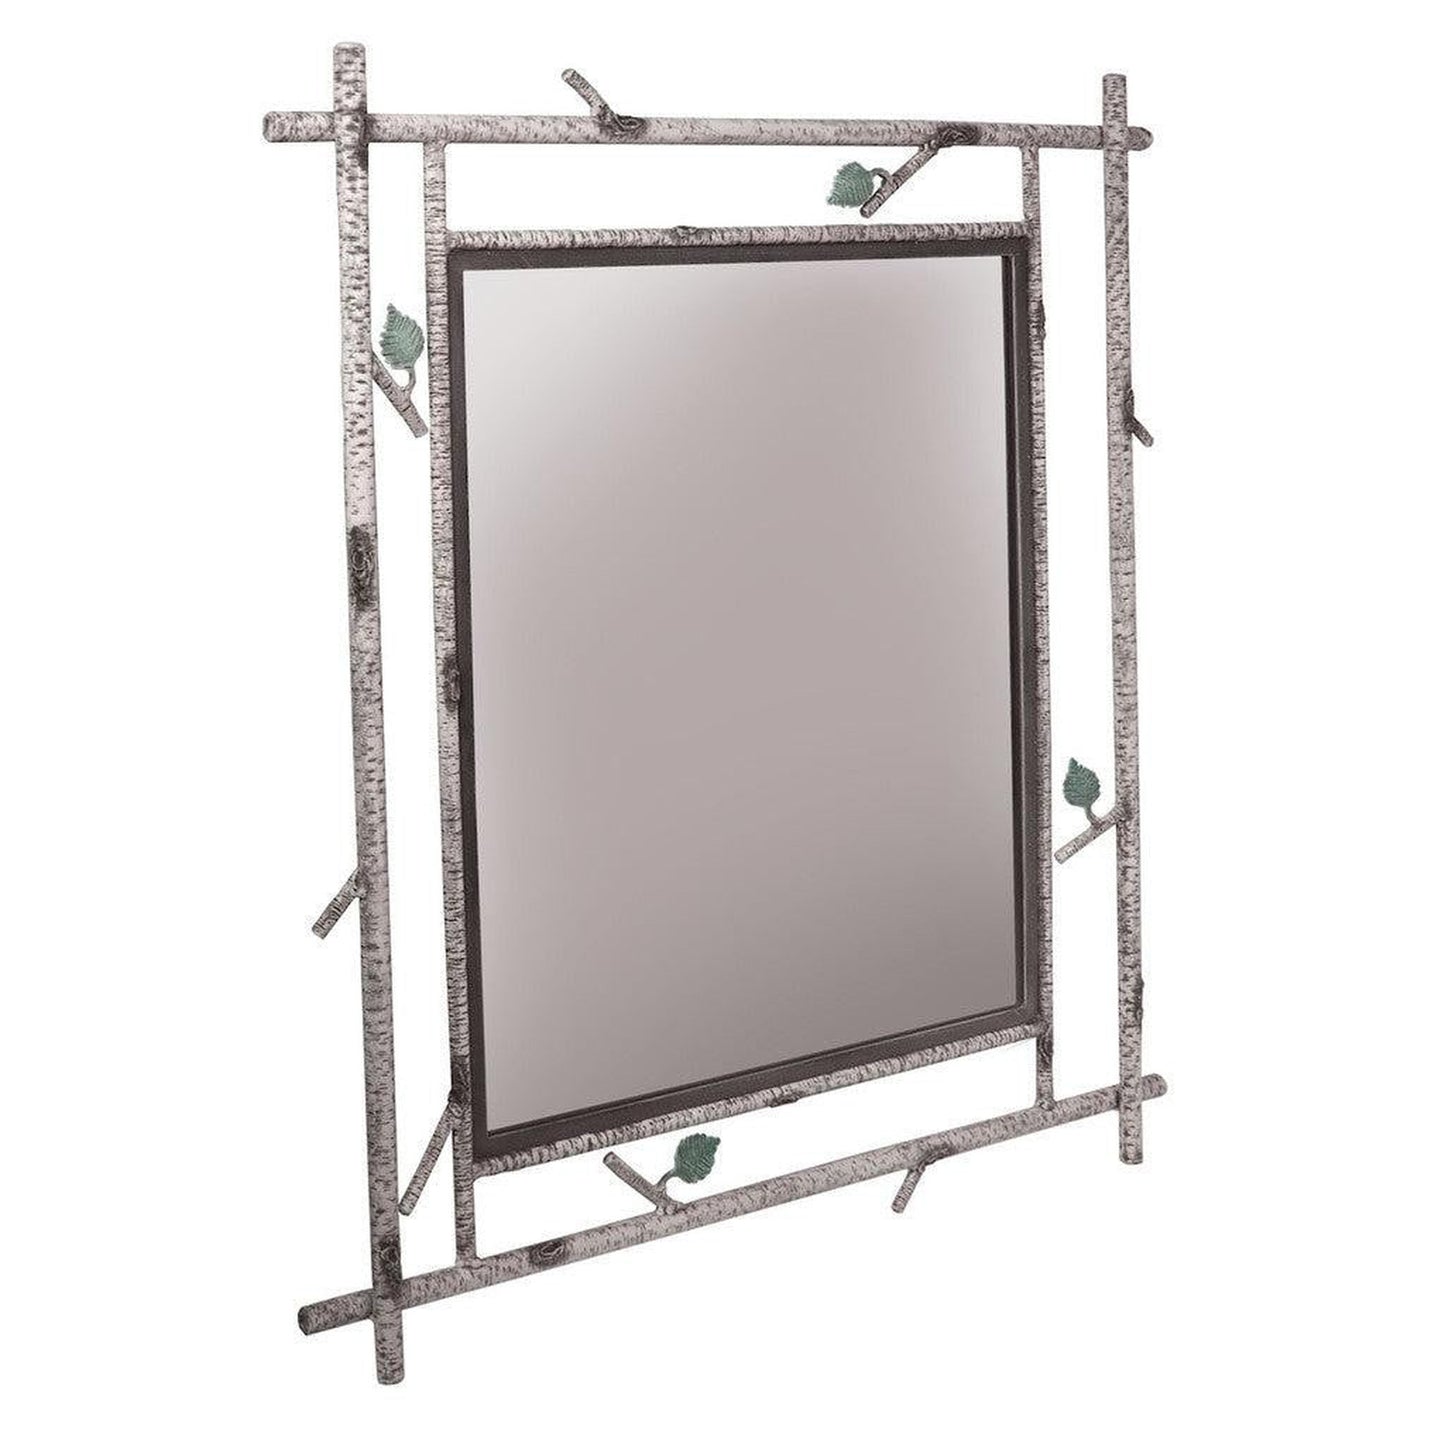 Stone County Ironworks Whisper Creek 35" x 47" Large Hand Rubbed Bronze Iron Wall Mirror With Pewter Iron Accent